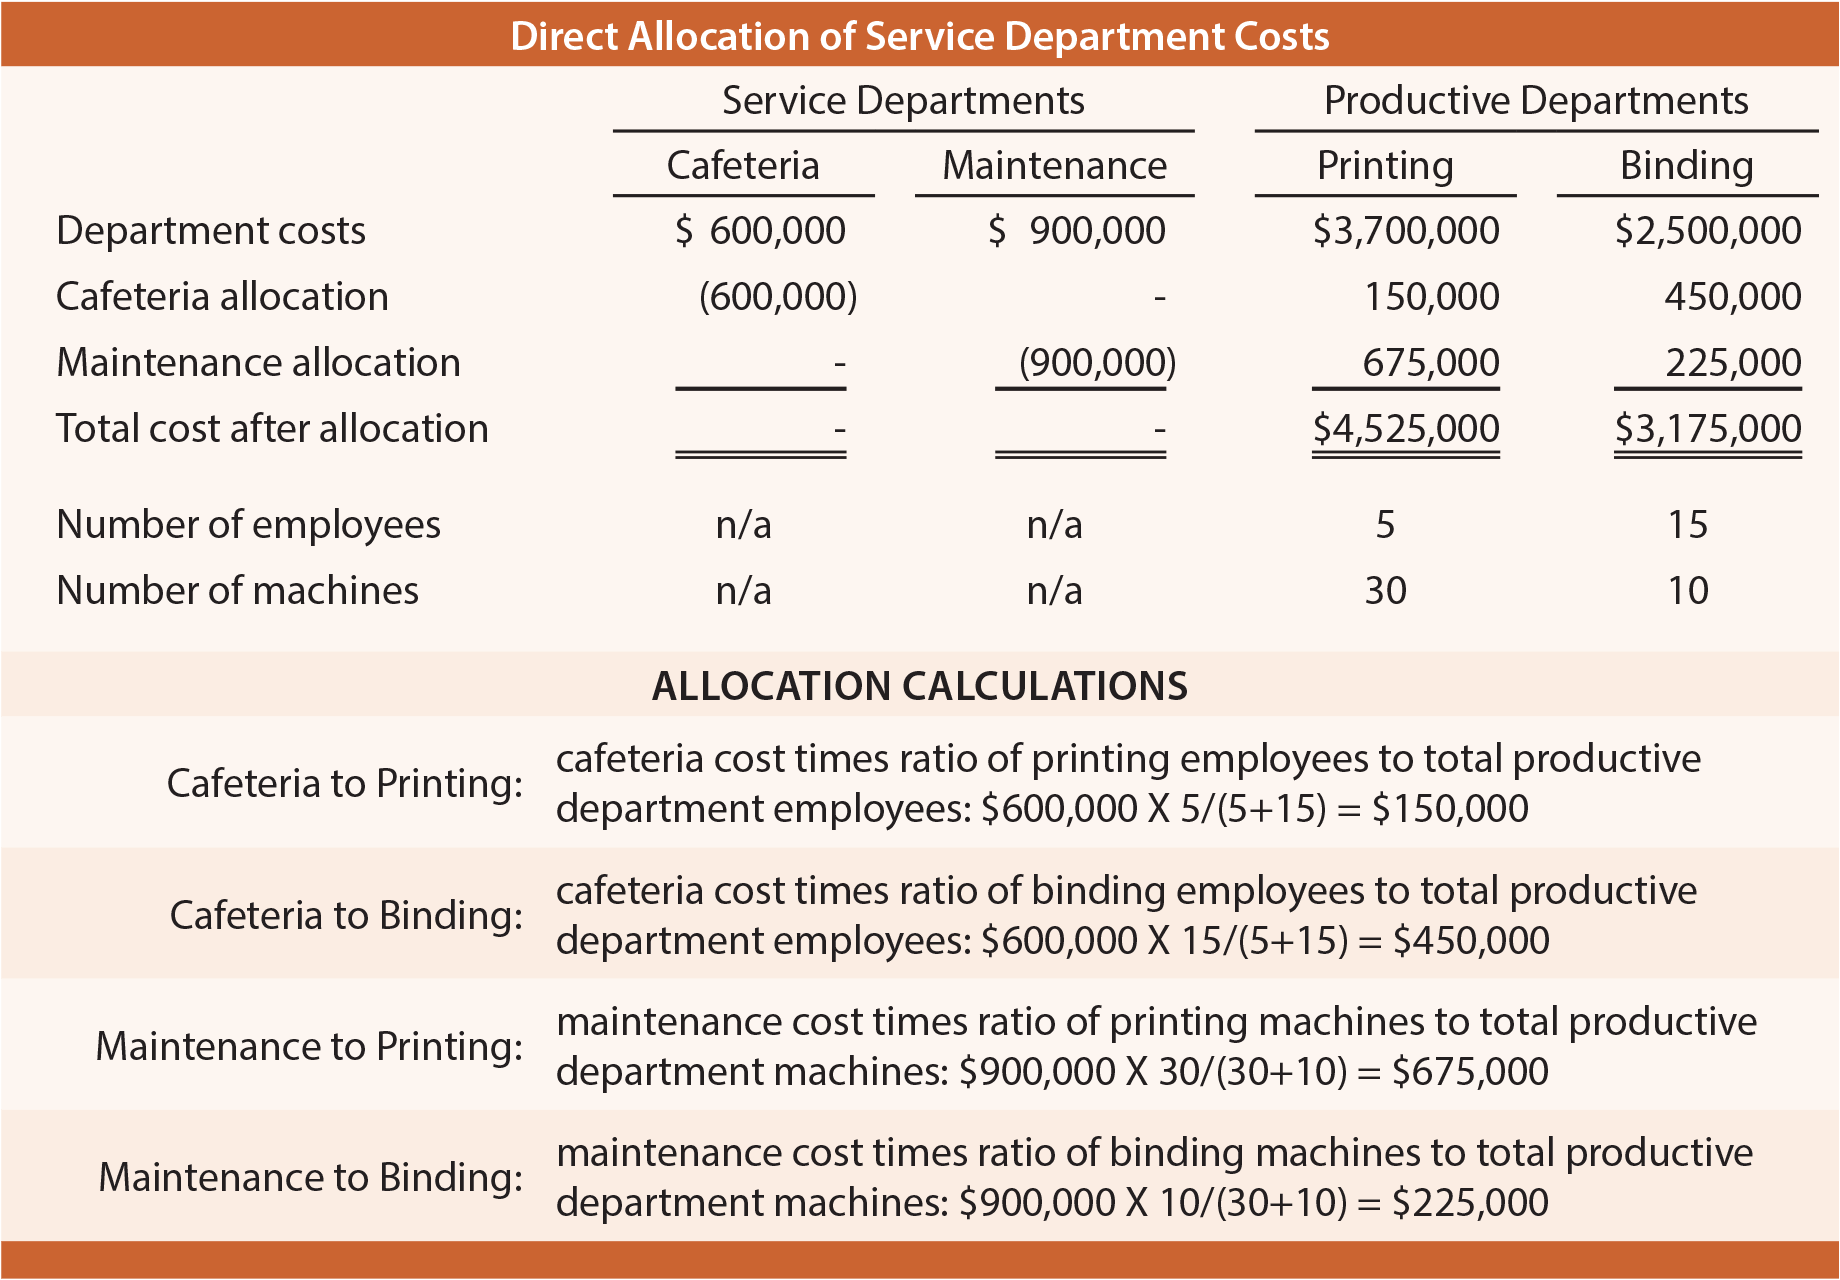 Direct Allocation of Service Department Costs